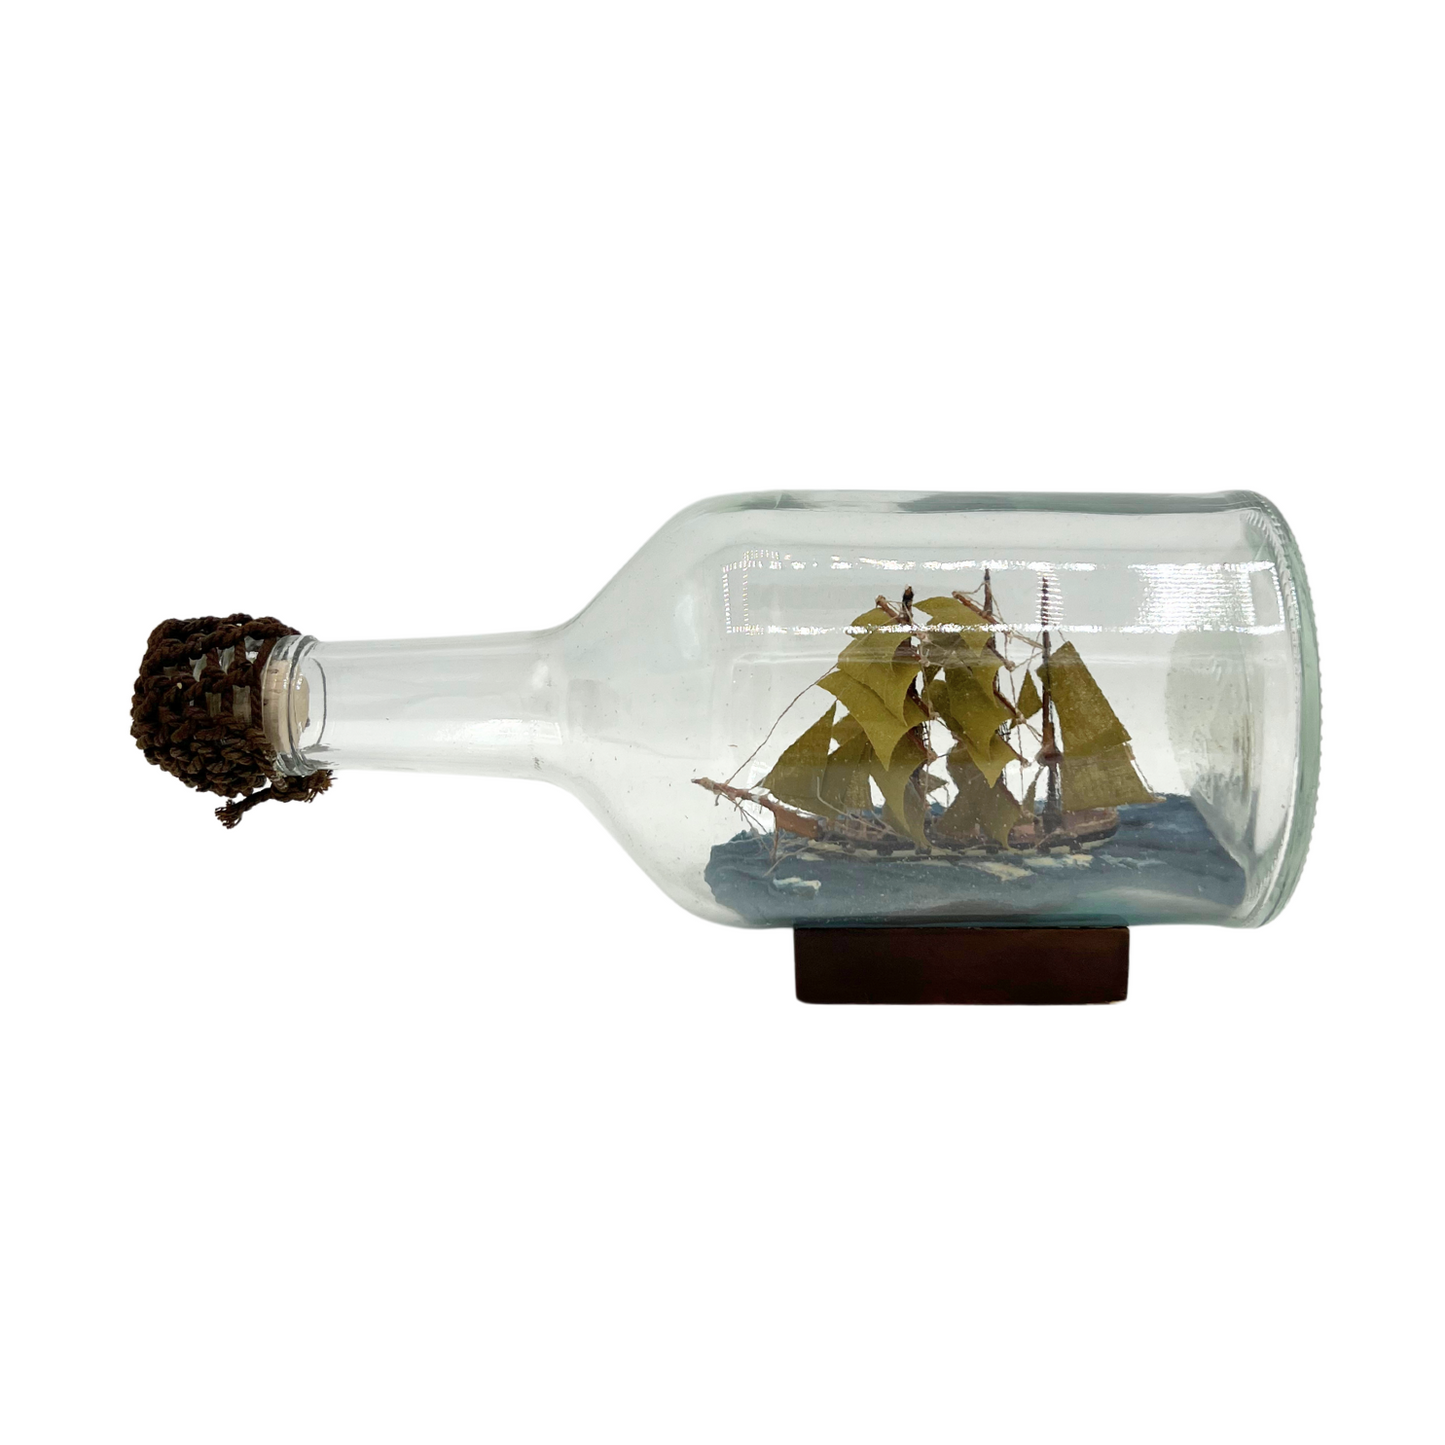 vintage Young America ship in a bottle